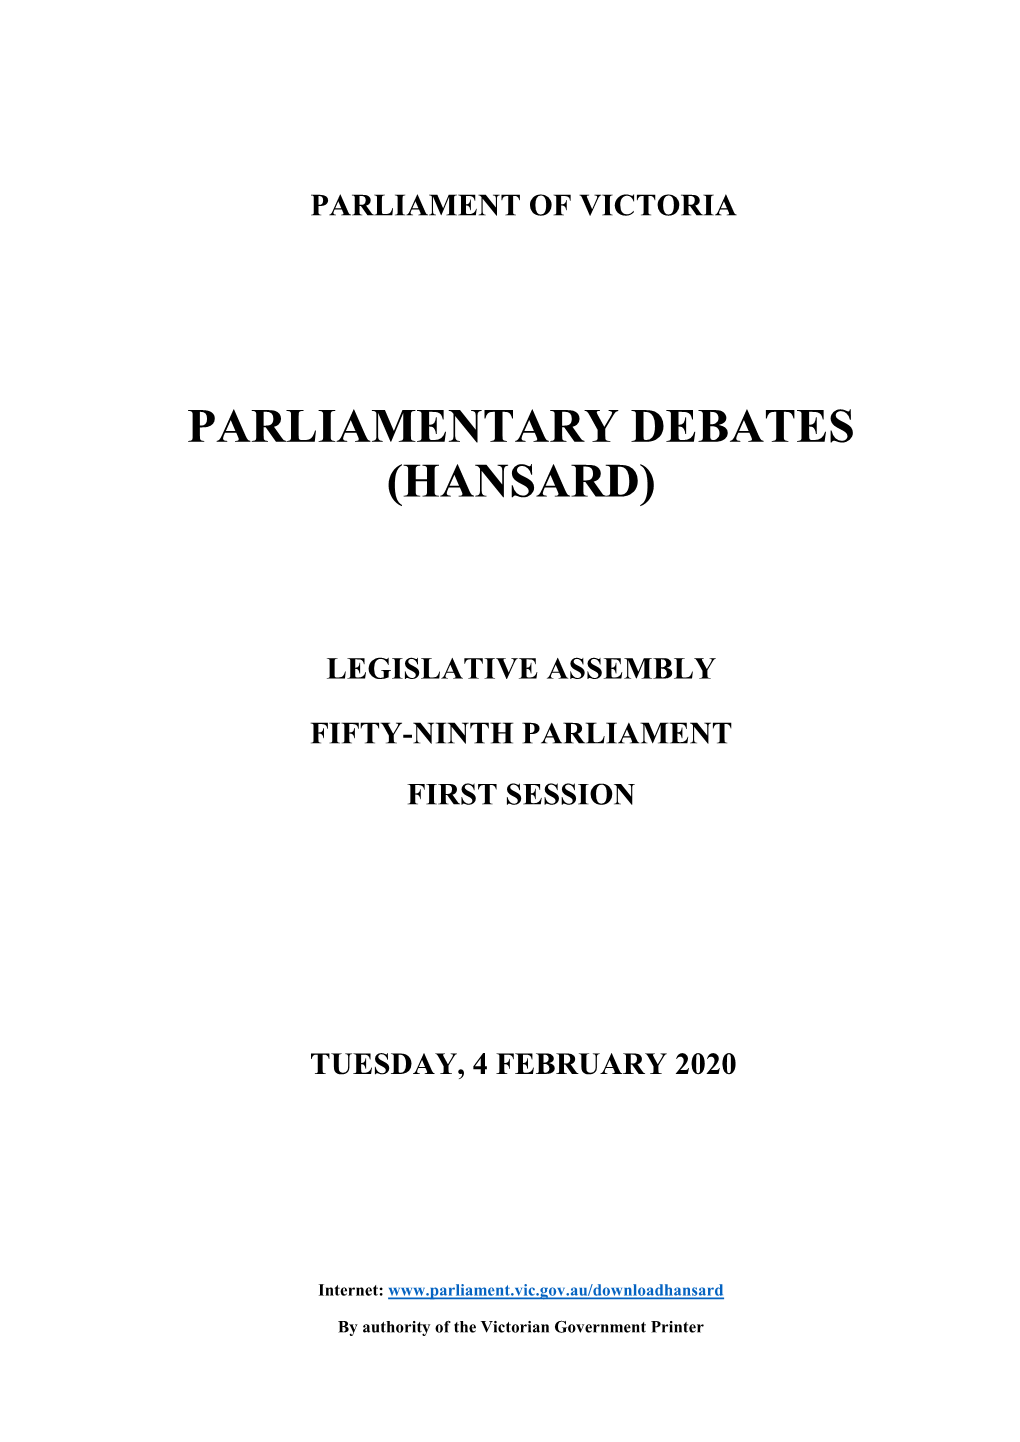 Legislative Assembly Fifty-Ninth Parliament First Session Tuesday, 4 February 2020